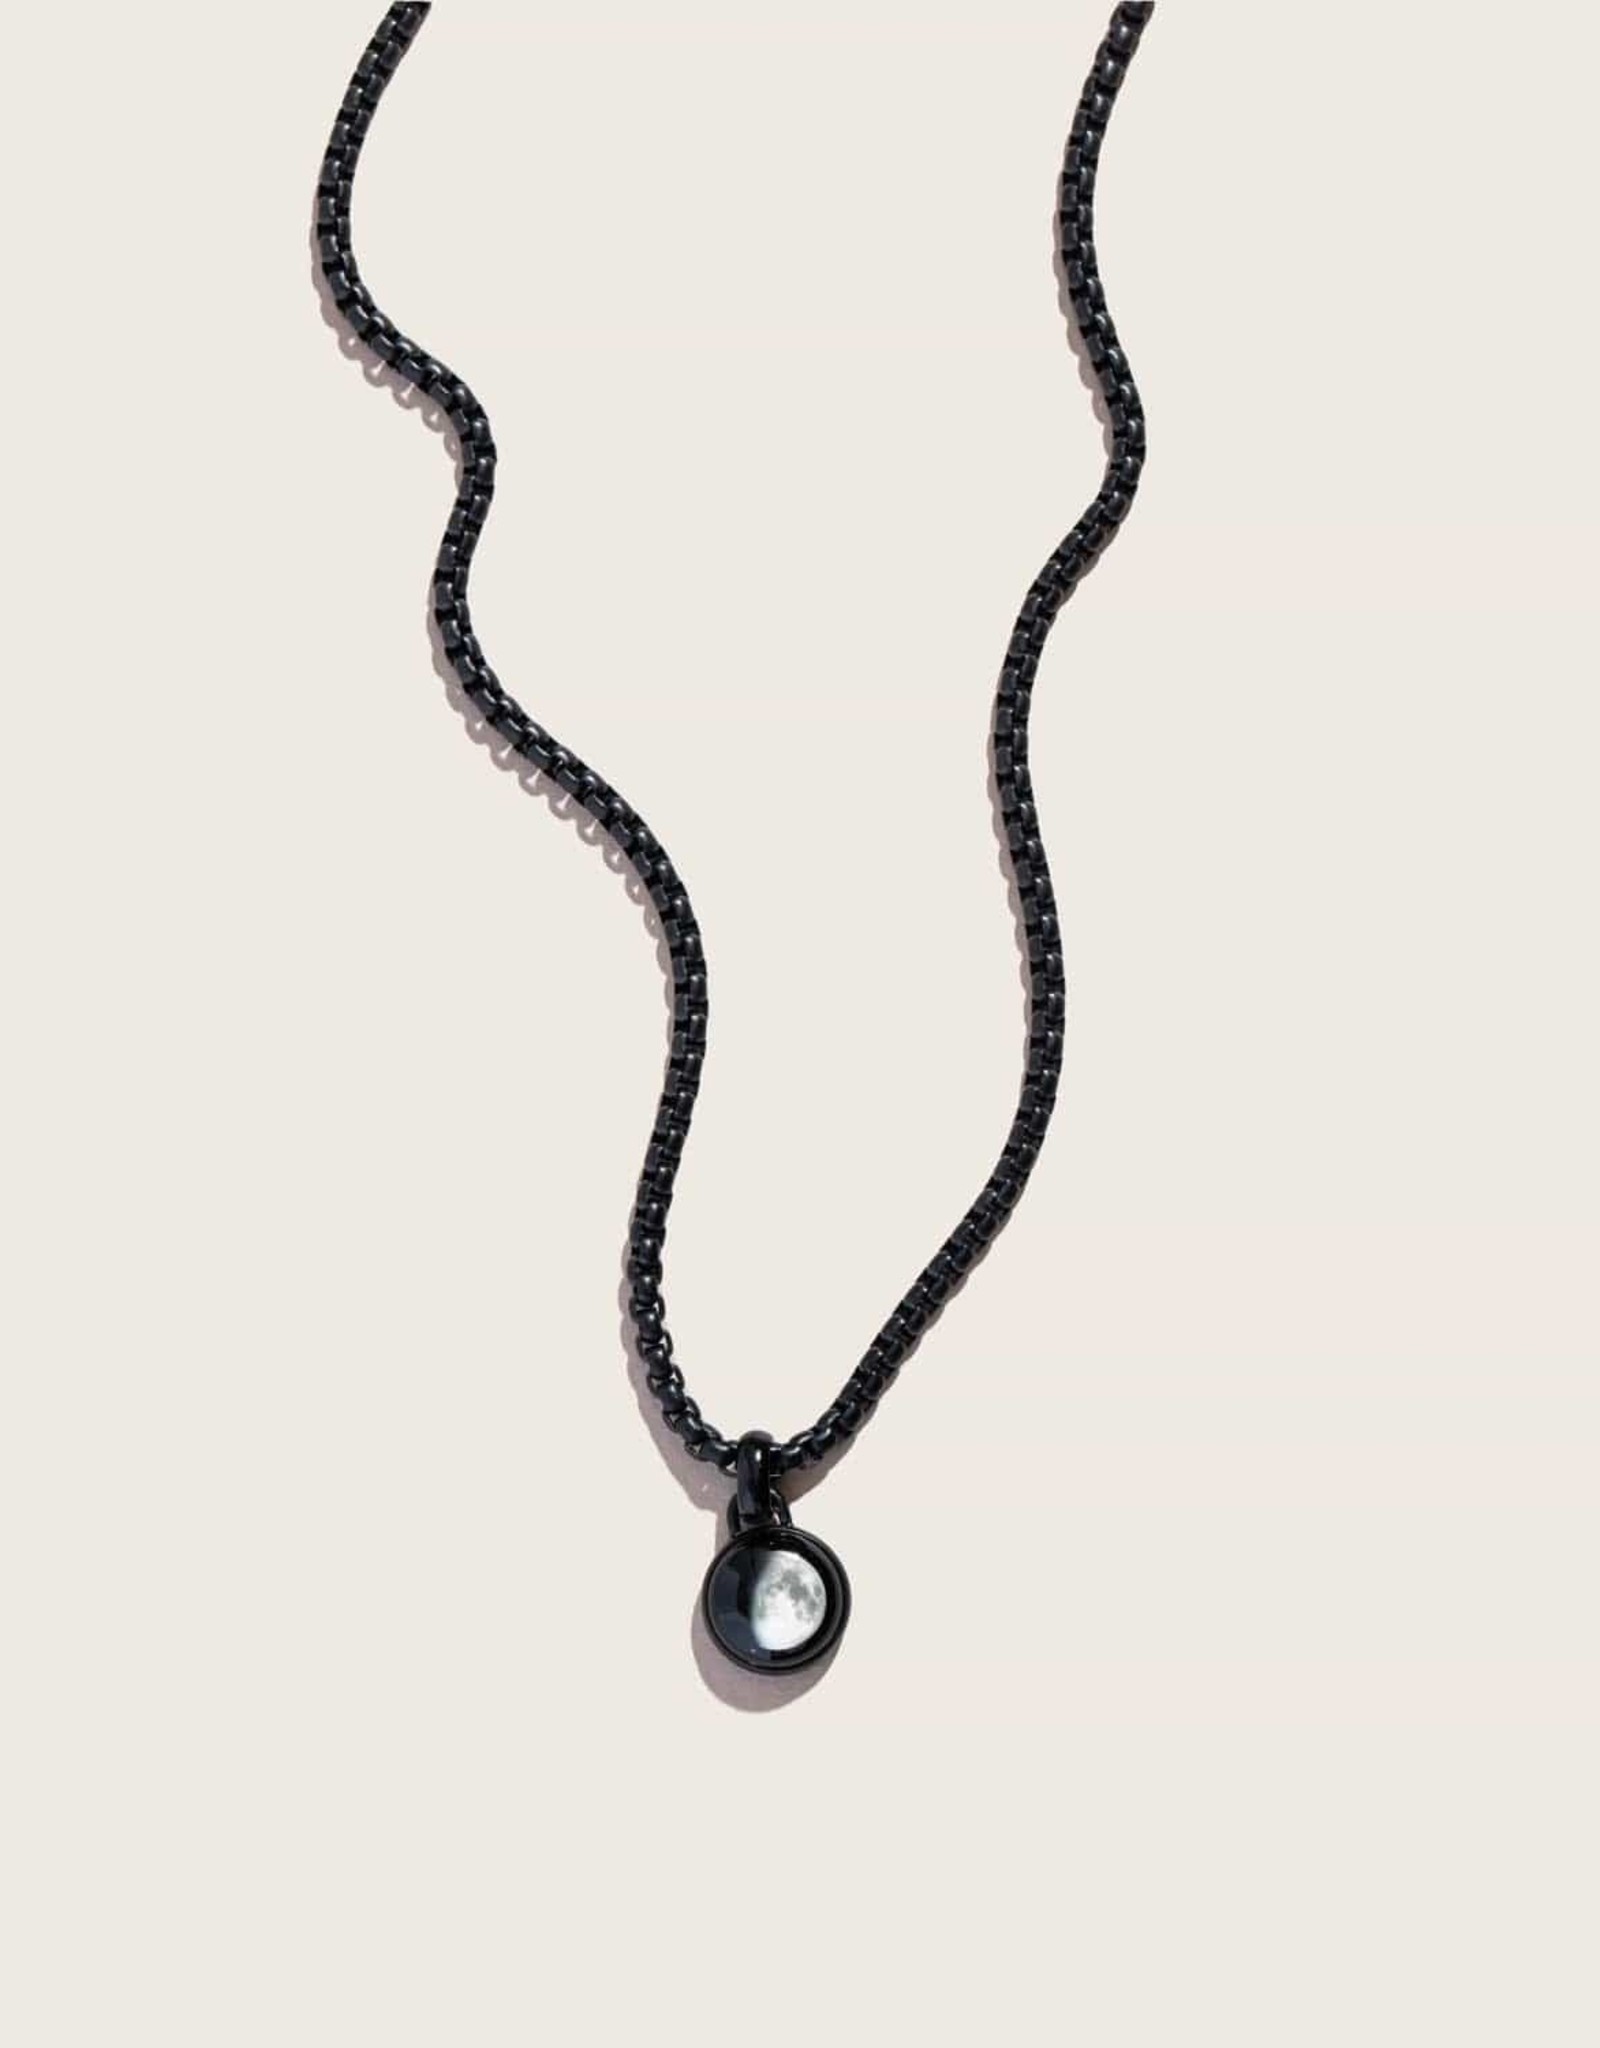 Moonglow Orion Necklace